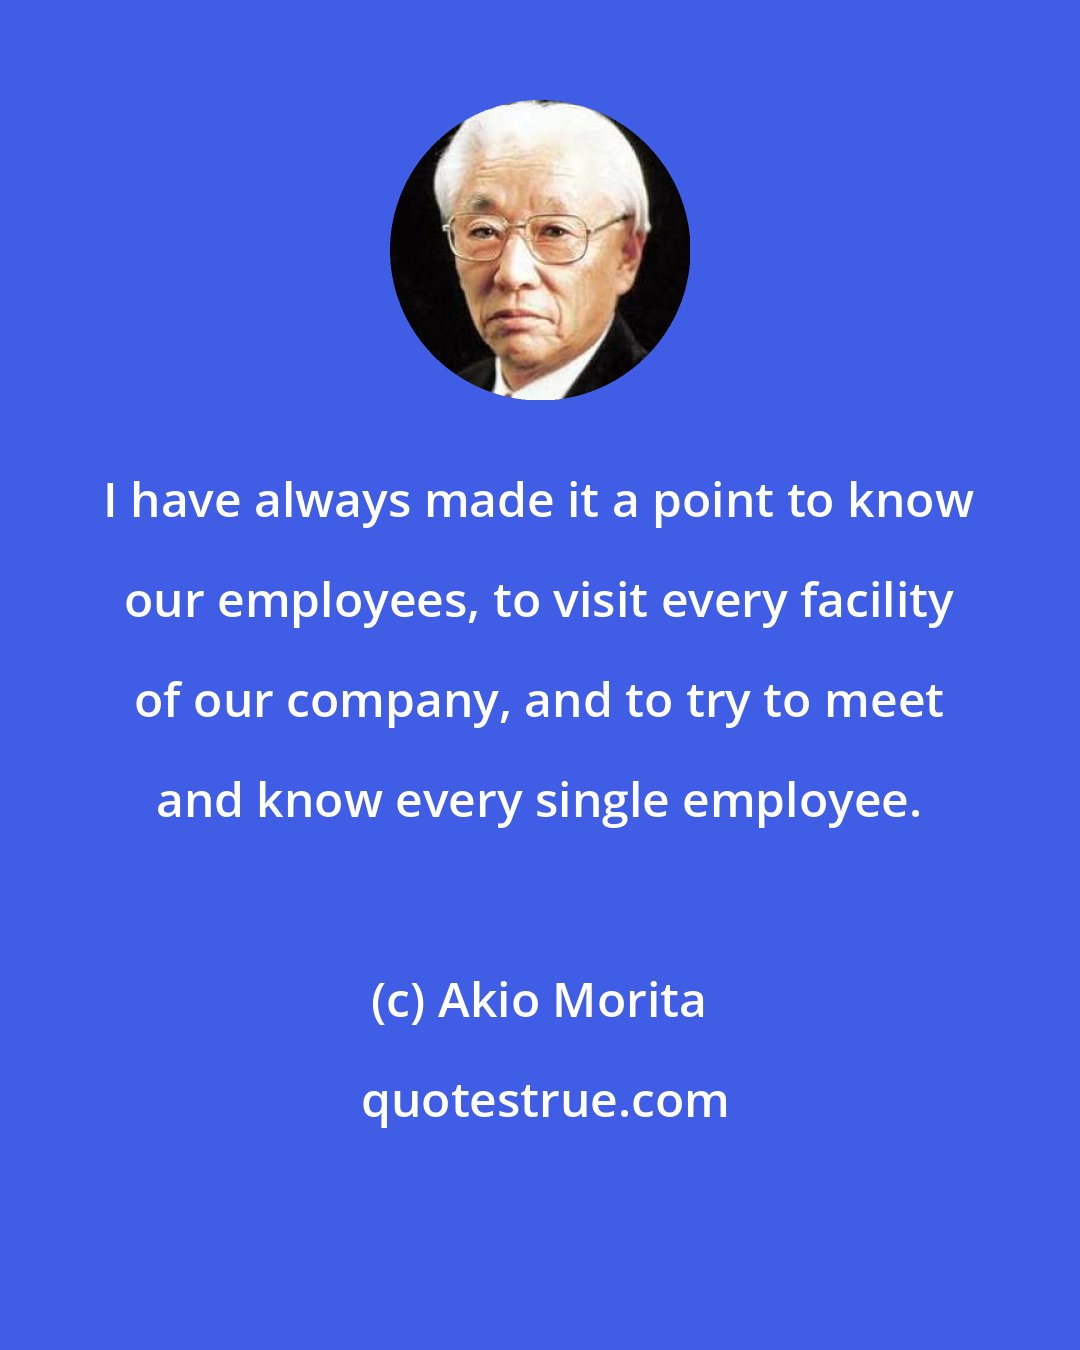 Akio Morita: I have always made it a point to know our employees, to visit every facility of our company, and to try to meet and know every single employee.